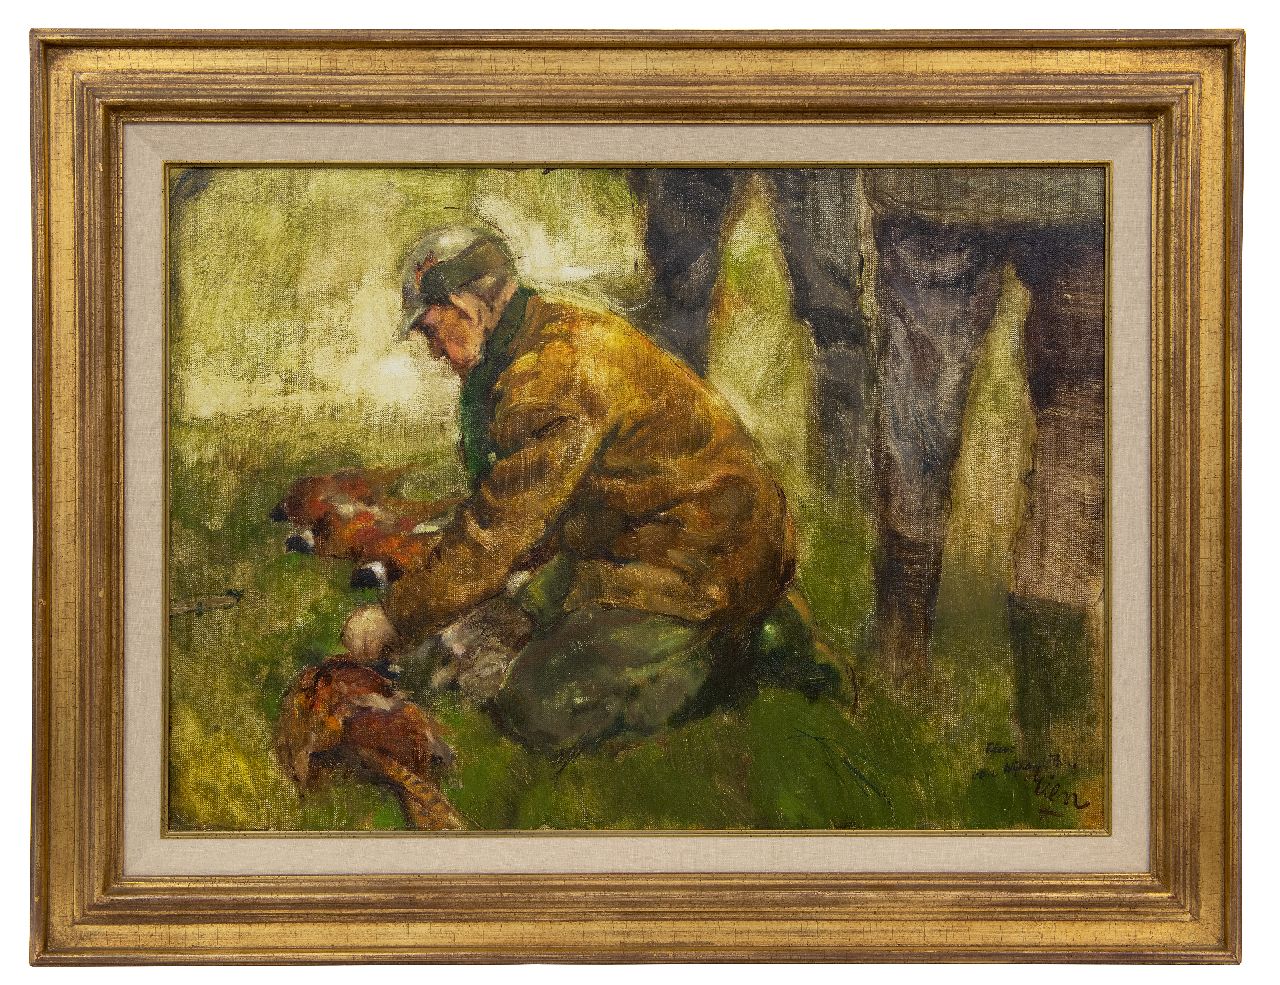 Poortvliet R.  | Rien Poortvliet, Hunter with pheasants, oil on canvas 50.0 x 70.2 cm, signed l.r.